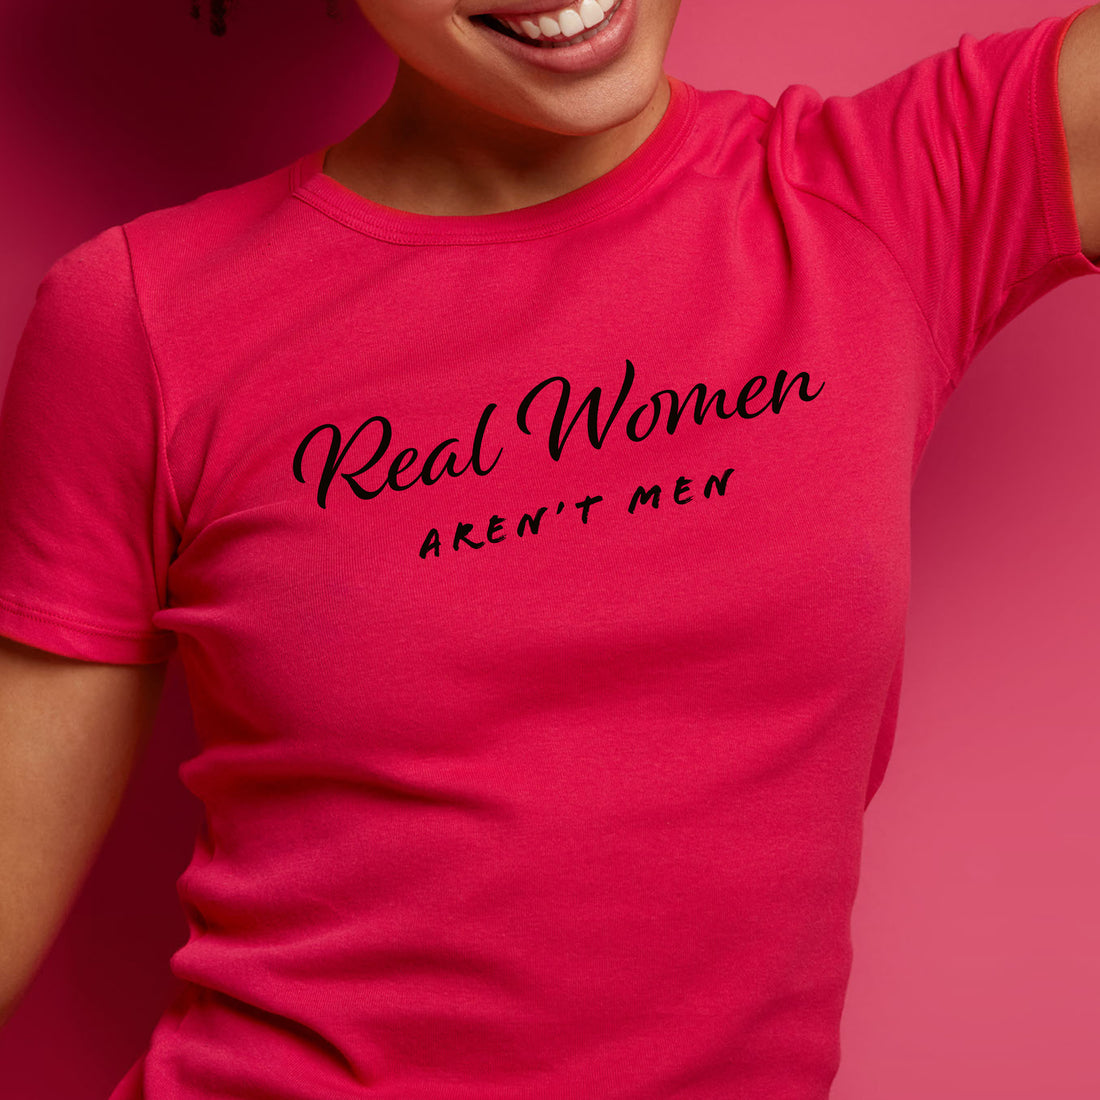 Womans torso wearing a red t-shirt that says Real Women Aren't Men.